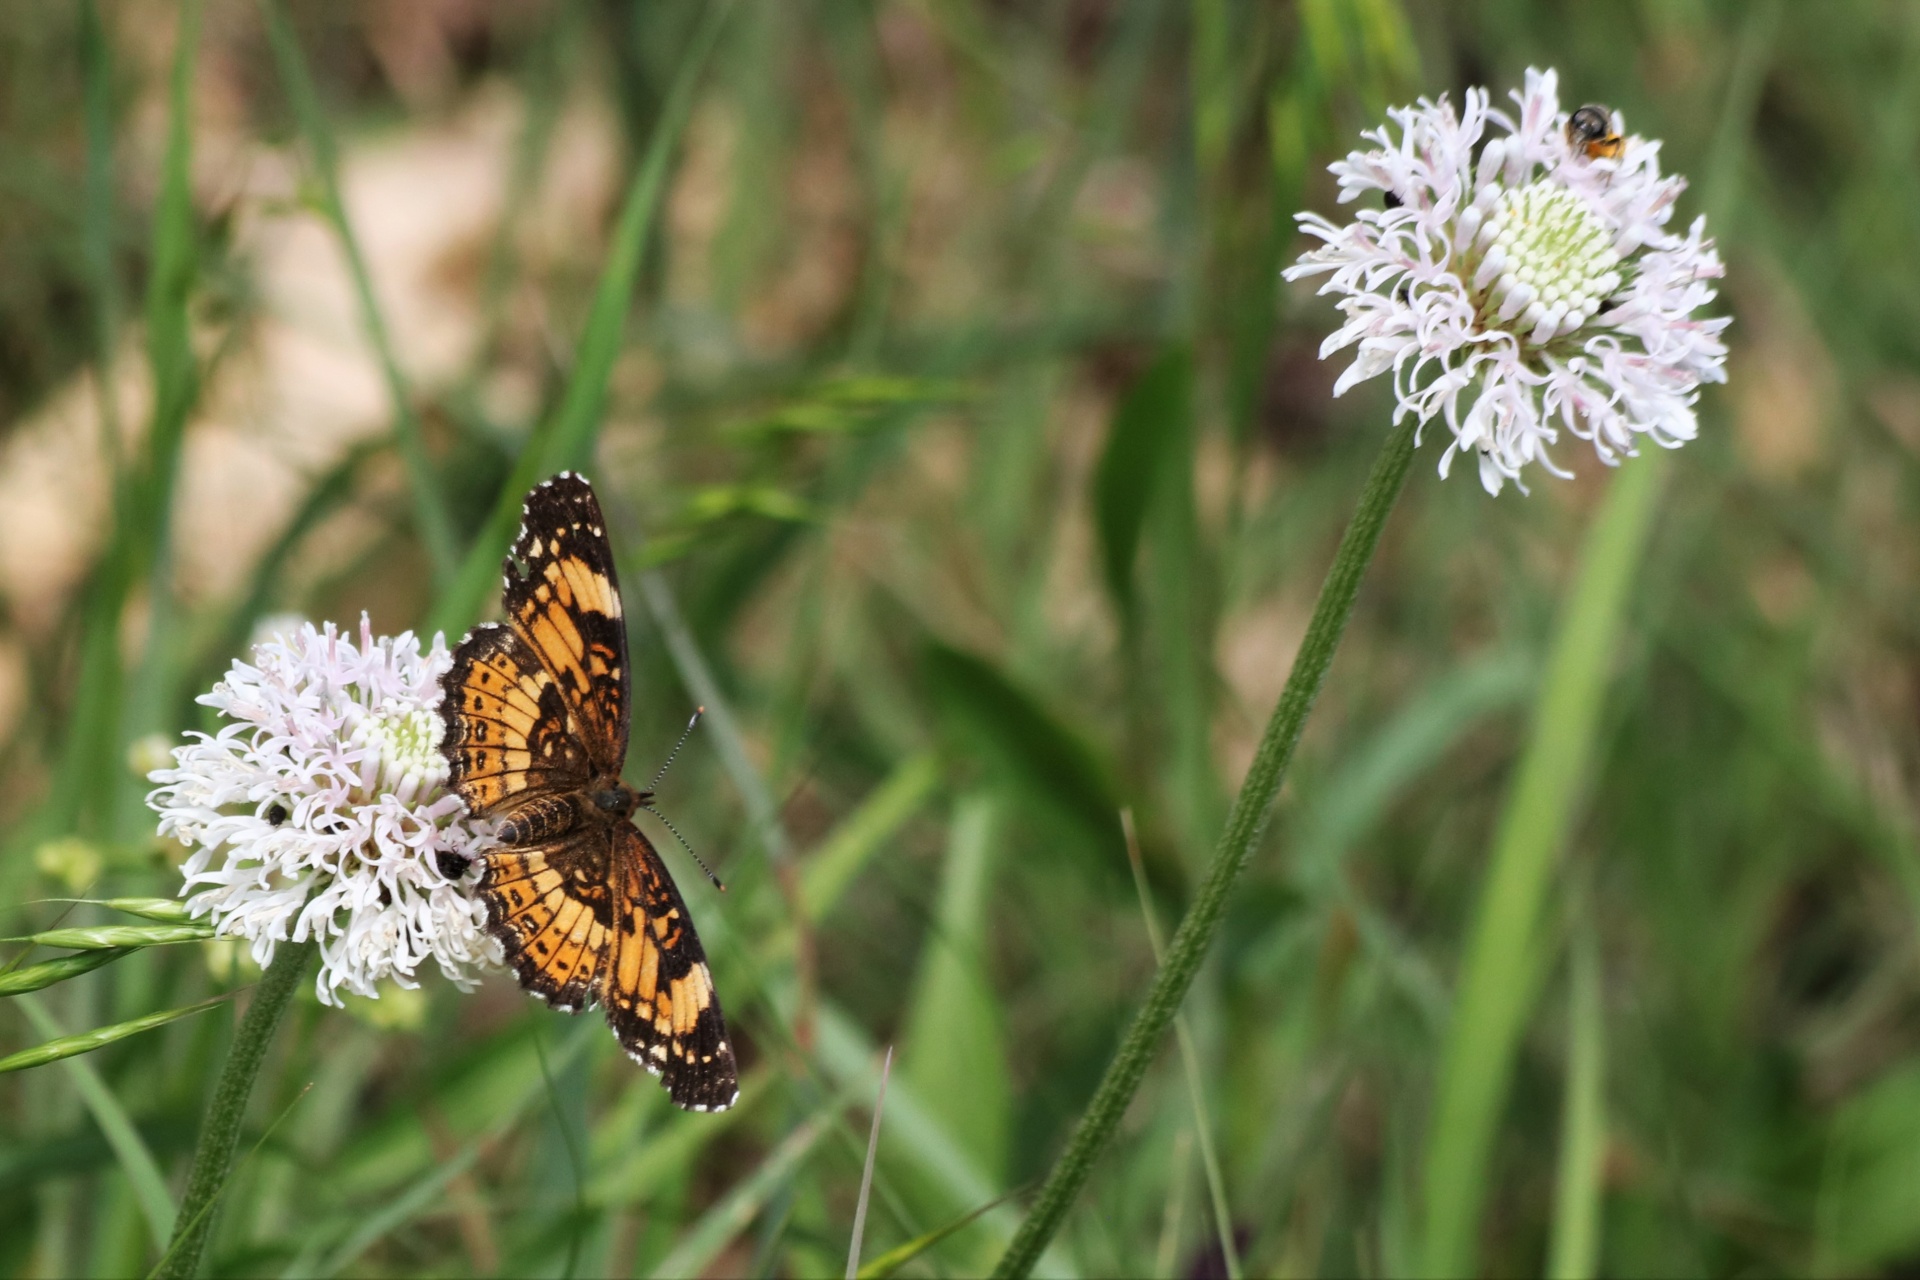 A silvery checkerspot butterfly is sipping nectar from a white puffball wildflower, in a green country field.